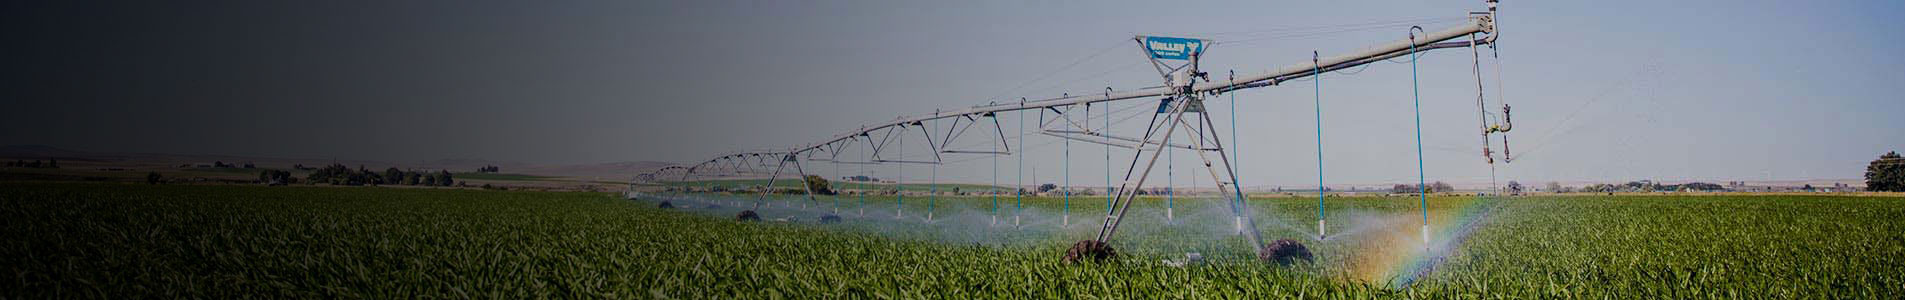 valley variable rate irrigation zone control - water application management solution